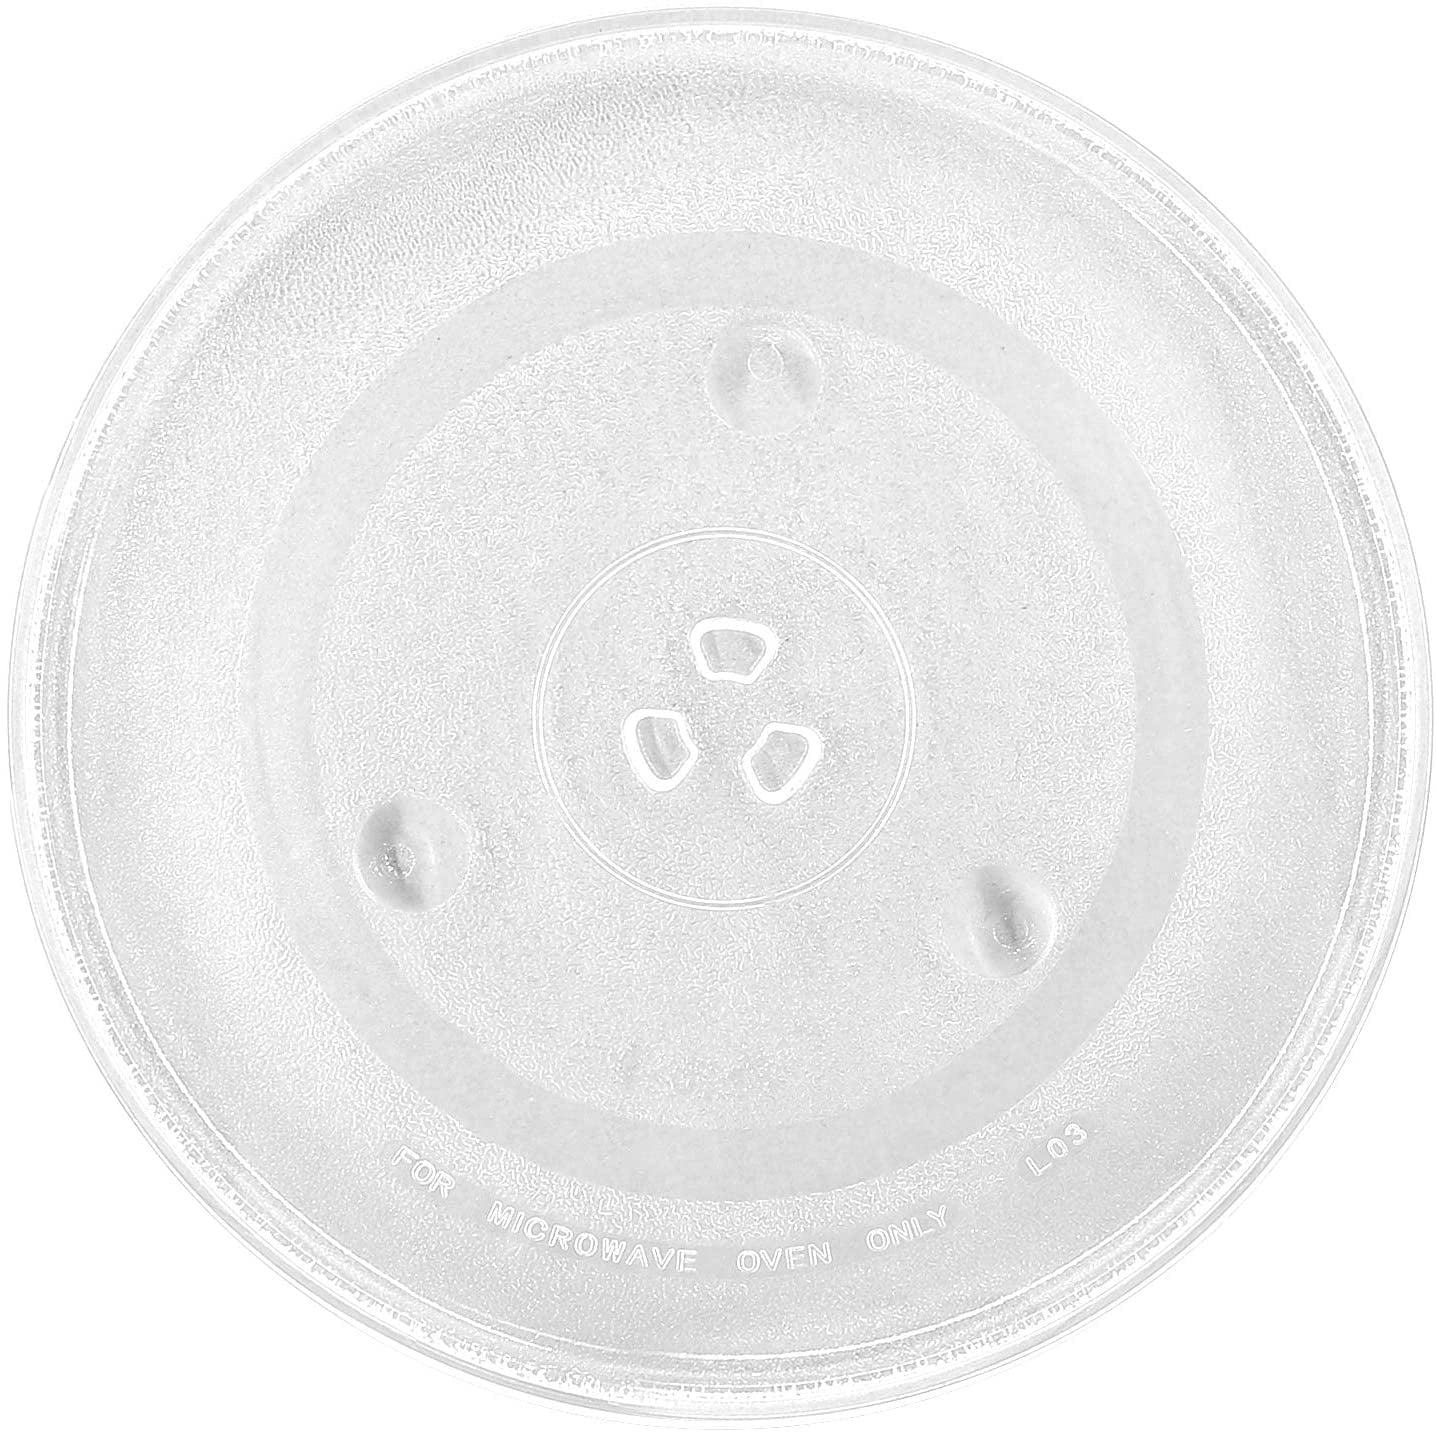 New OEM GE WB49X10189 Microwave Glass Tray Turntable 